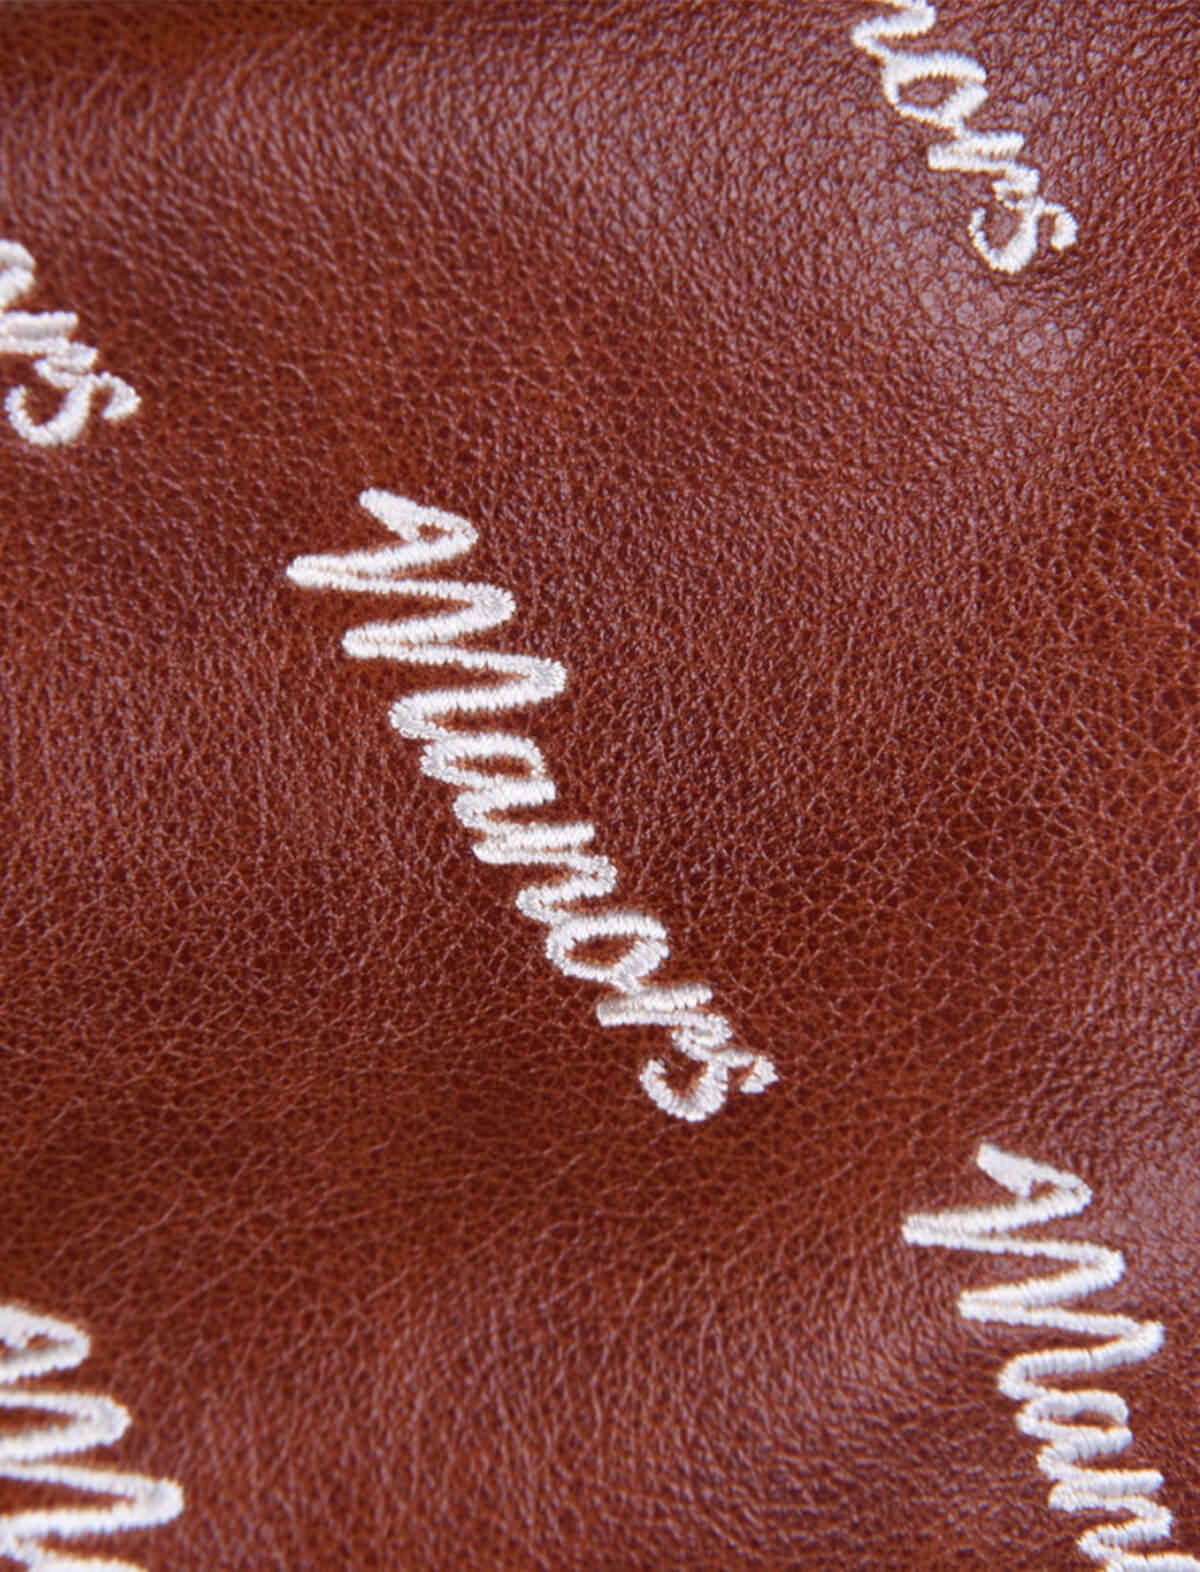 MANORS GOLF Leather Driver Cover in Brown